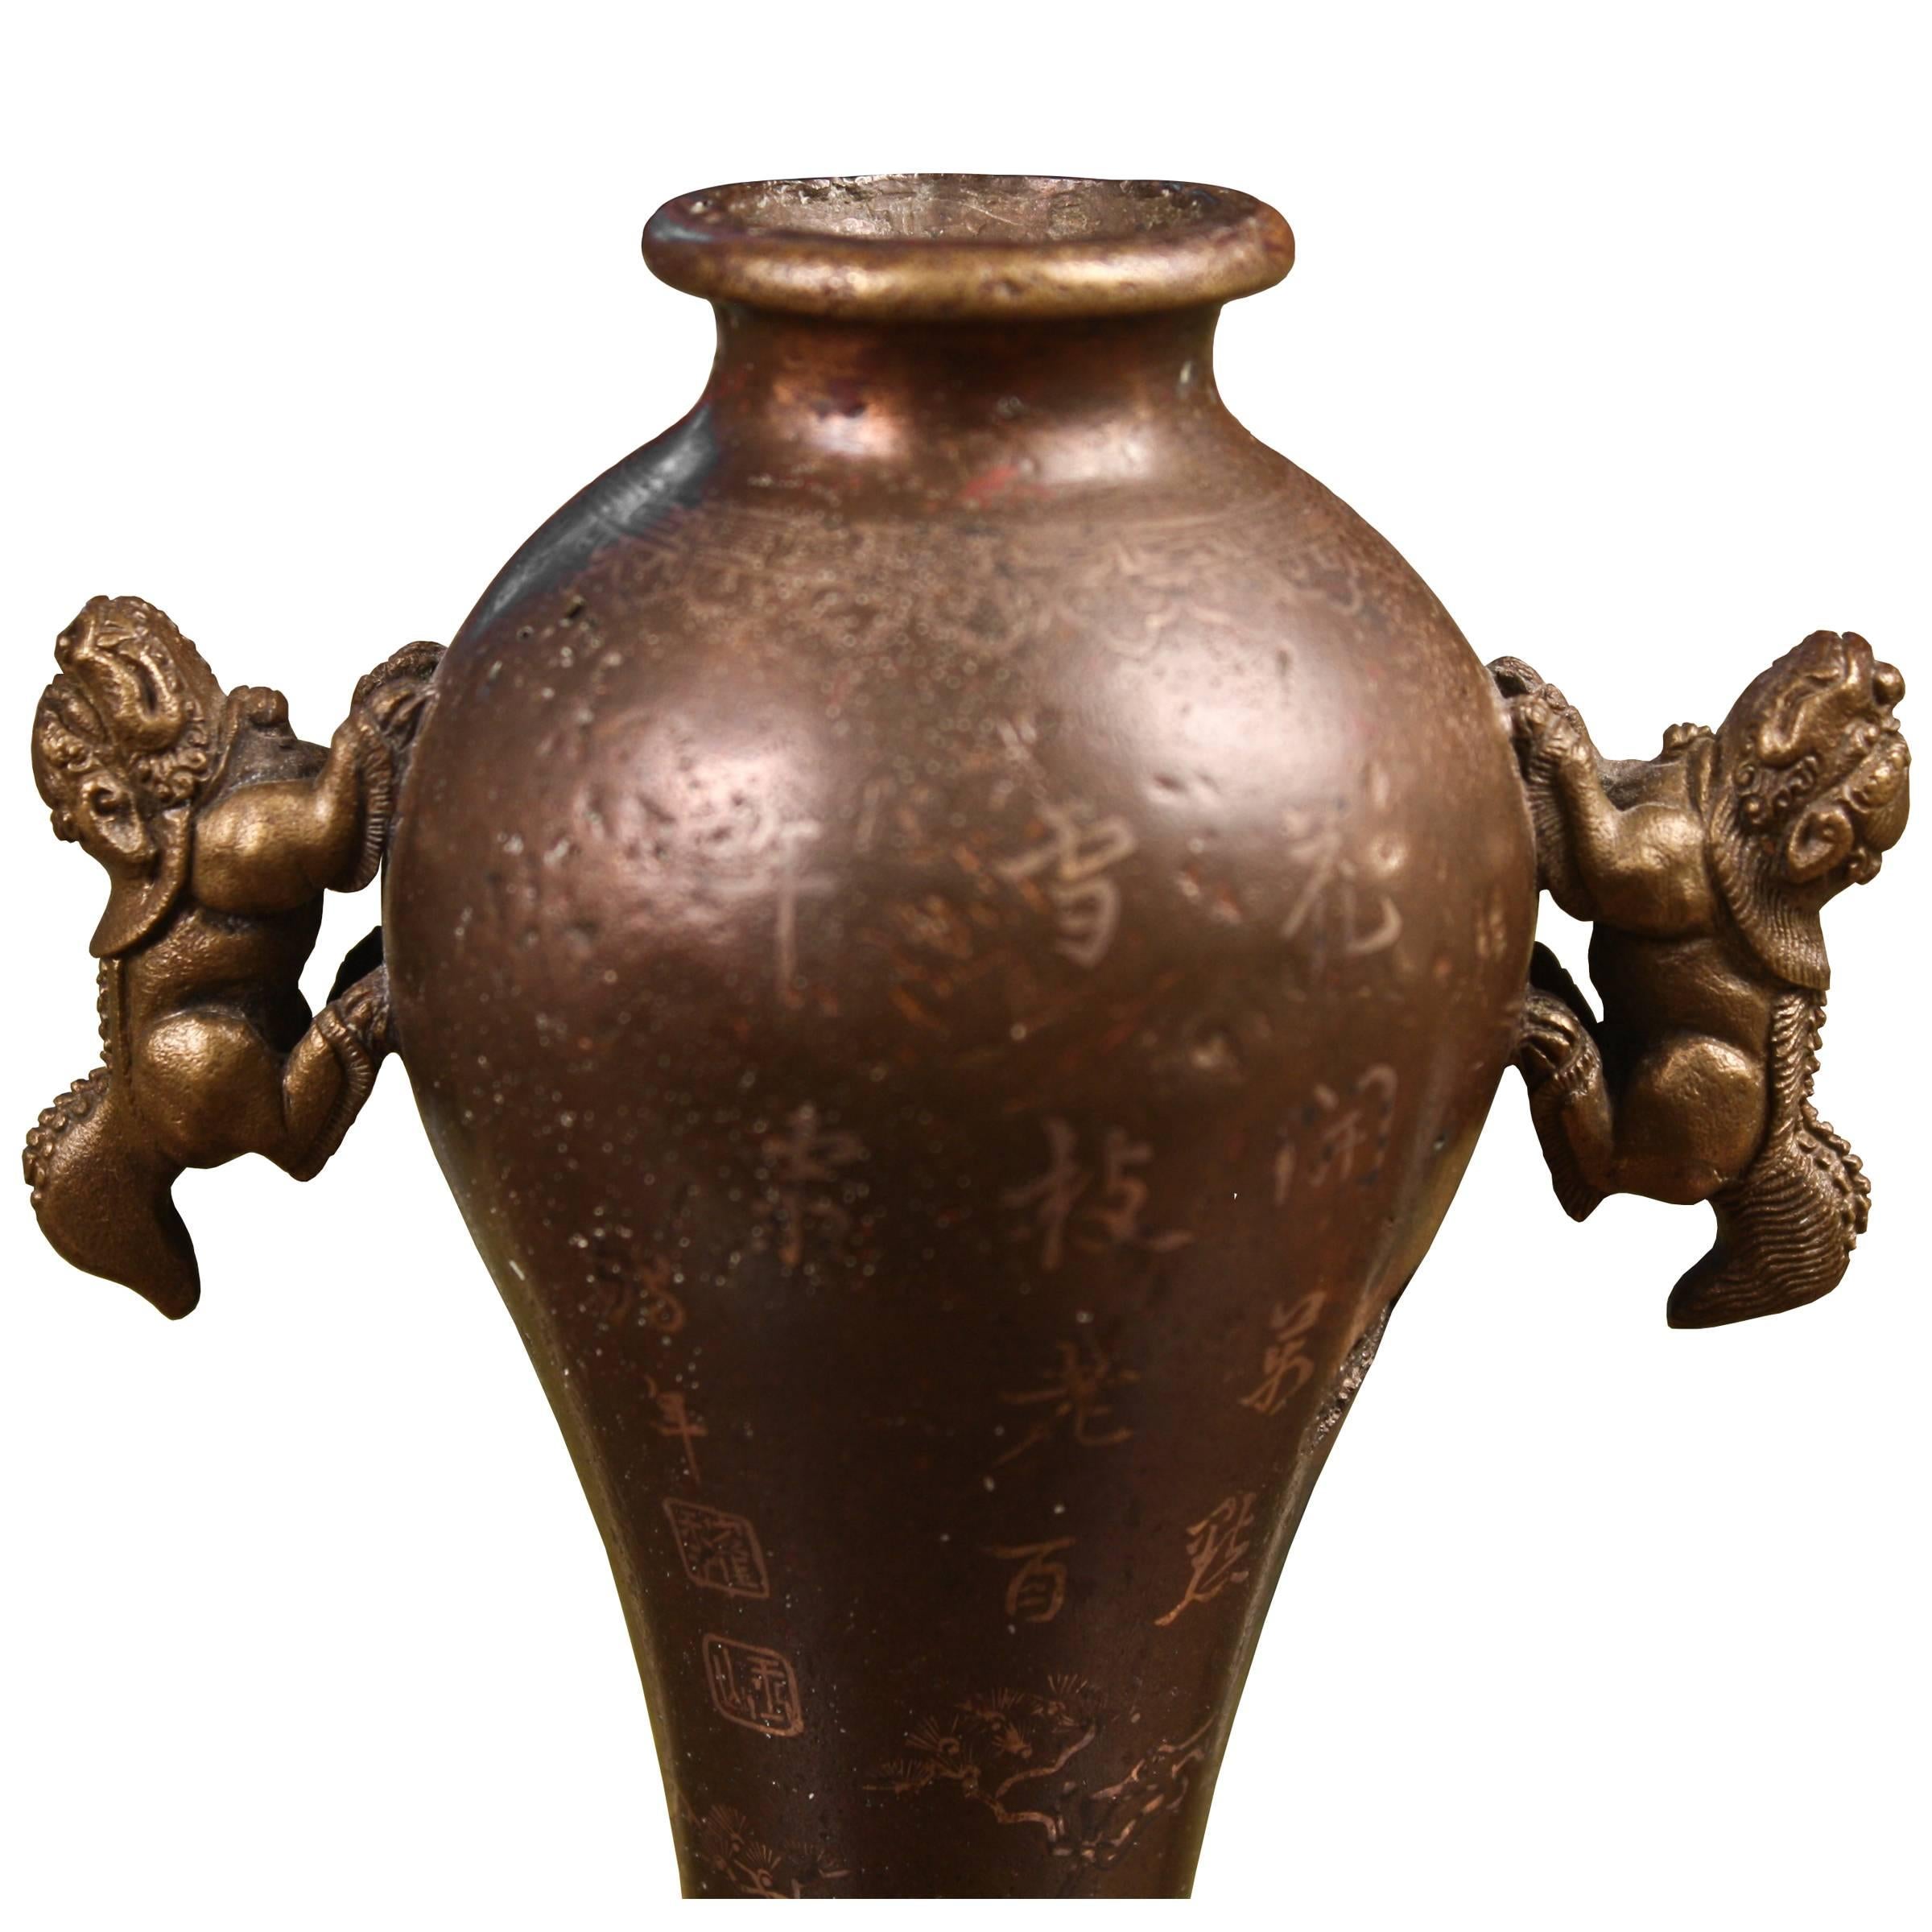 In Chinese art distinctive tall vases with narrow necks and wide swelling shoulders that taper to a narrow bottom are called Meiping. They make the ideal flower vase and were designed specifically to hold a single branch of plum tree blossoms. This